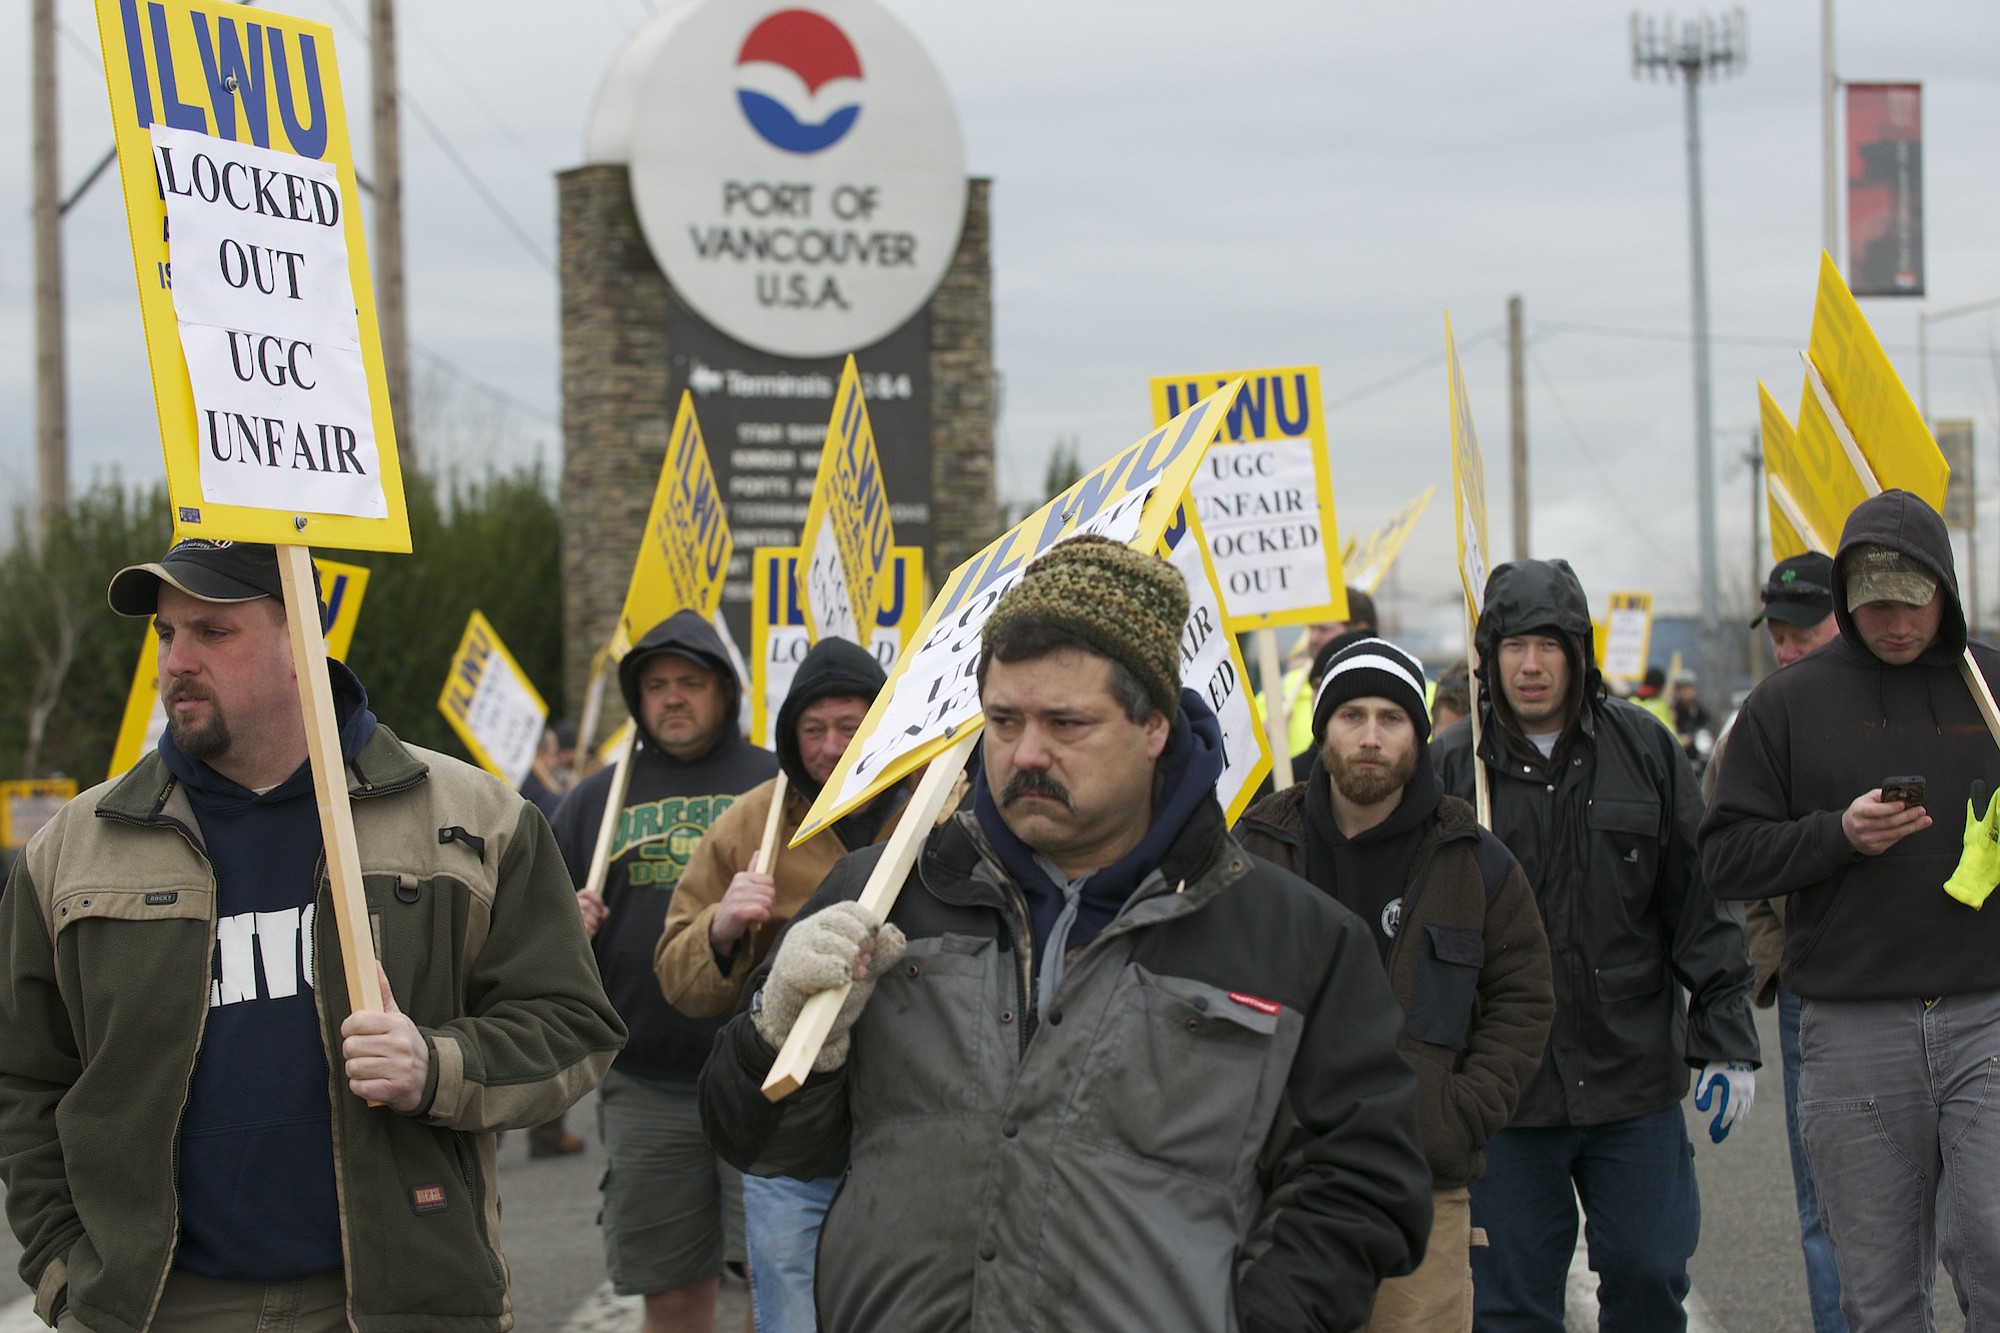 Nearly 50 workers picket outside the main entrance to the Port of Vancouver on Feb. 27, 2013.